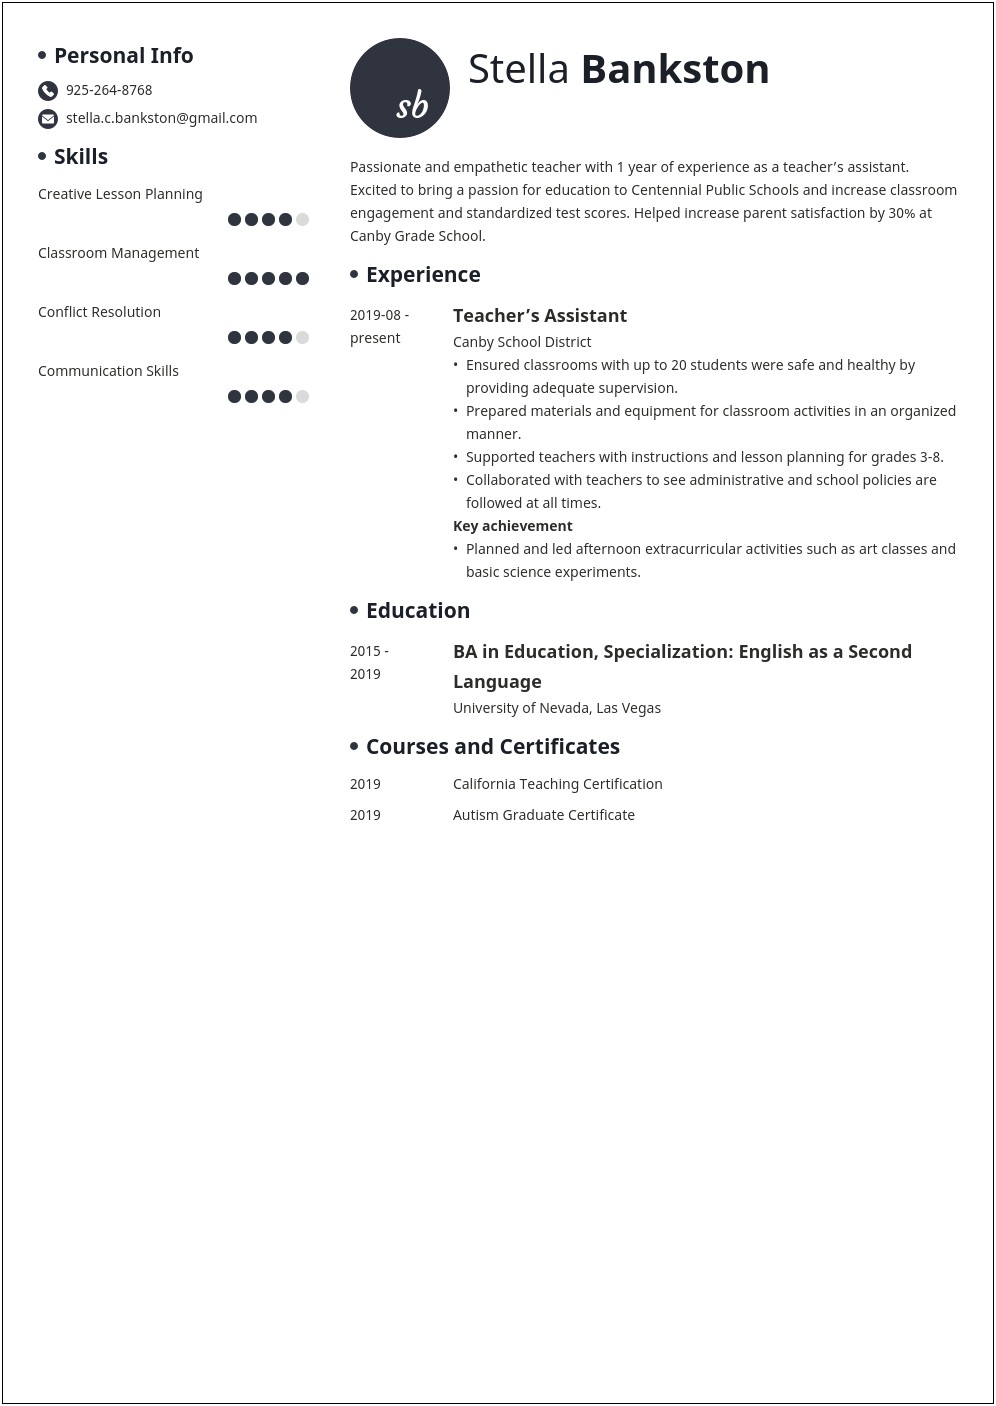 Resume Objective Statement For Teaching Position